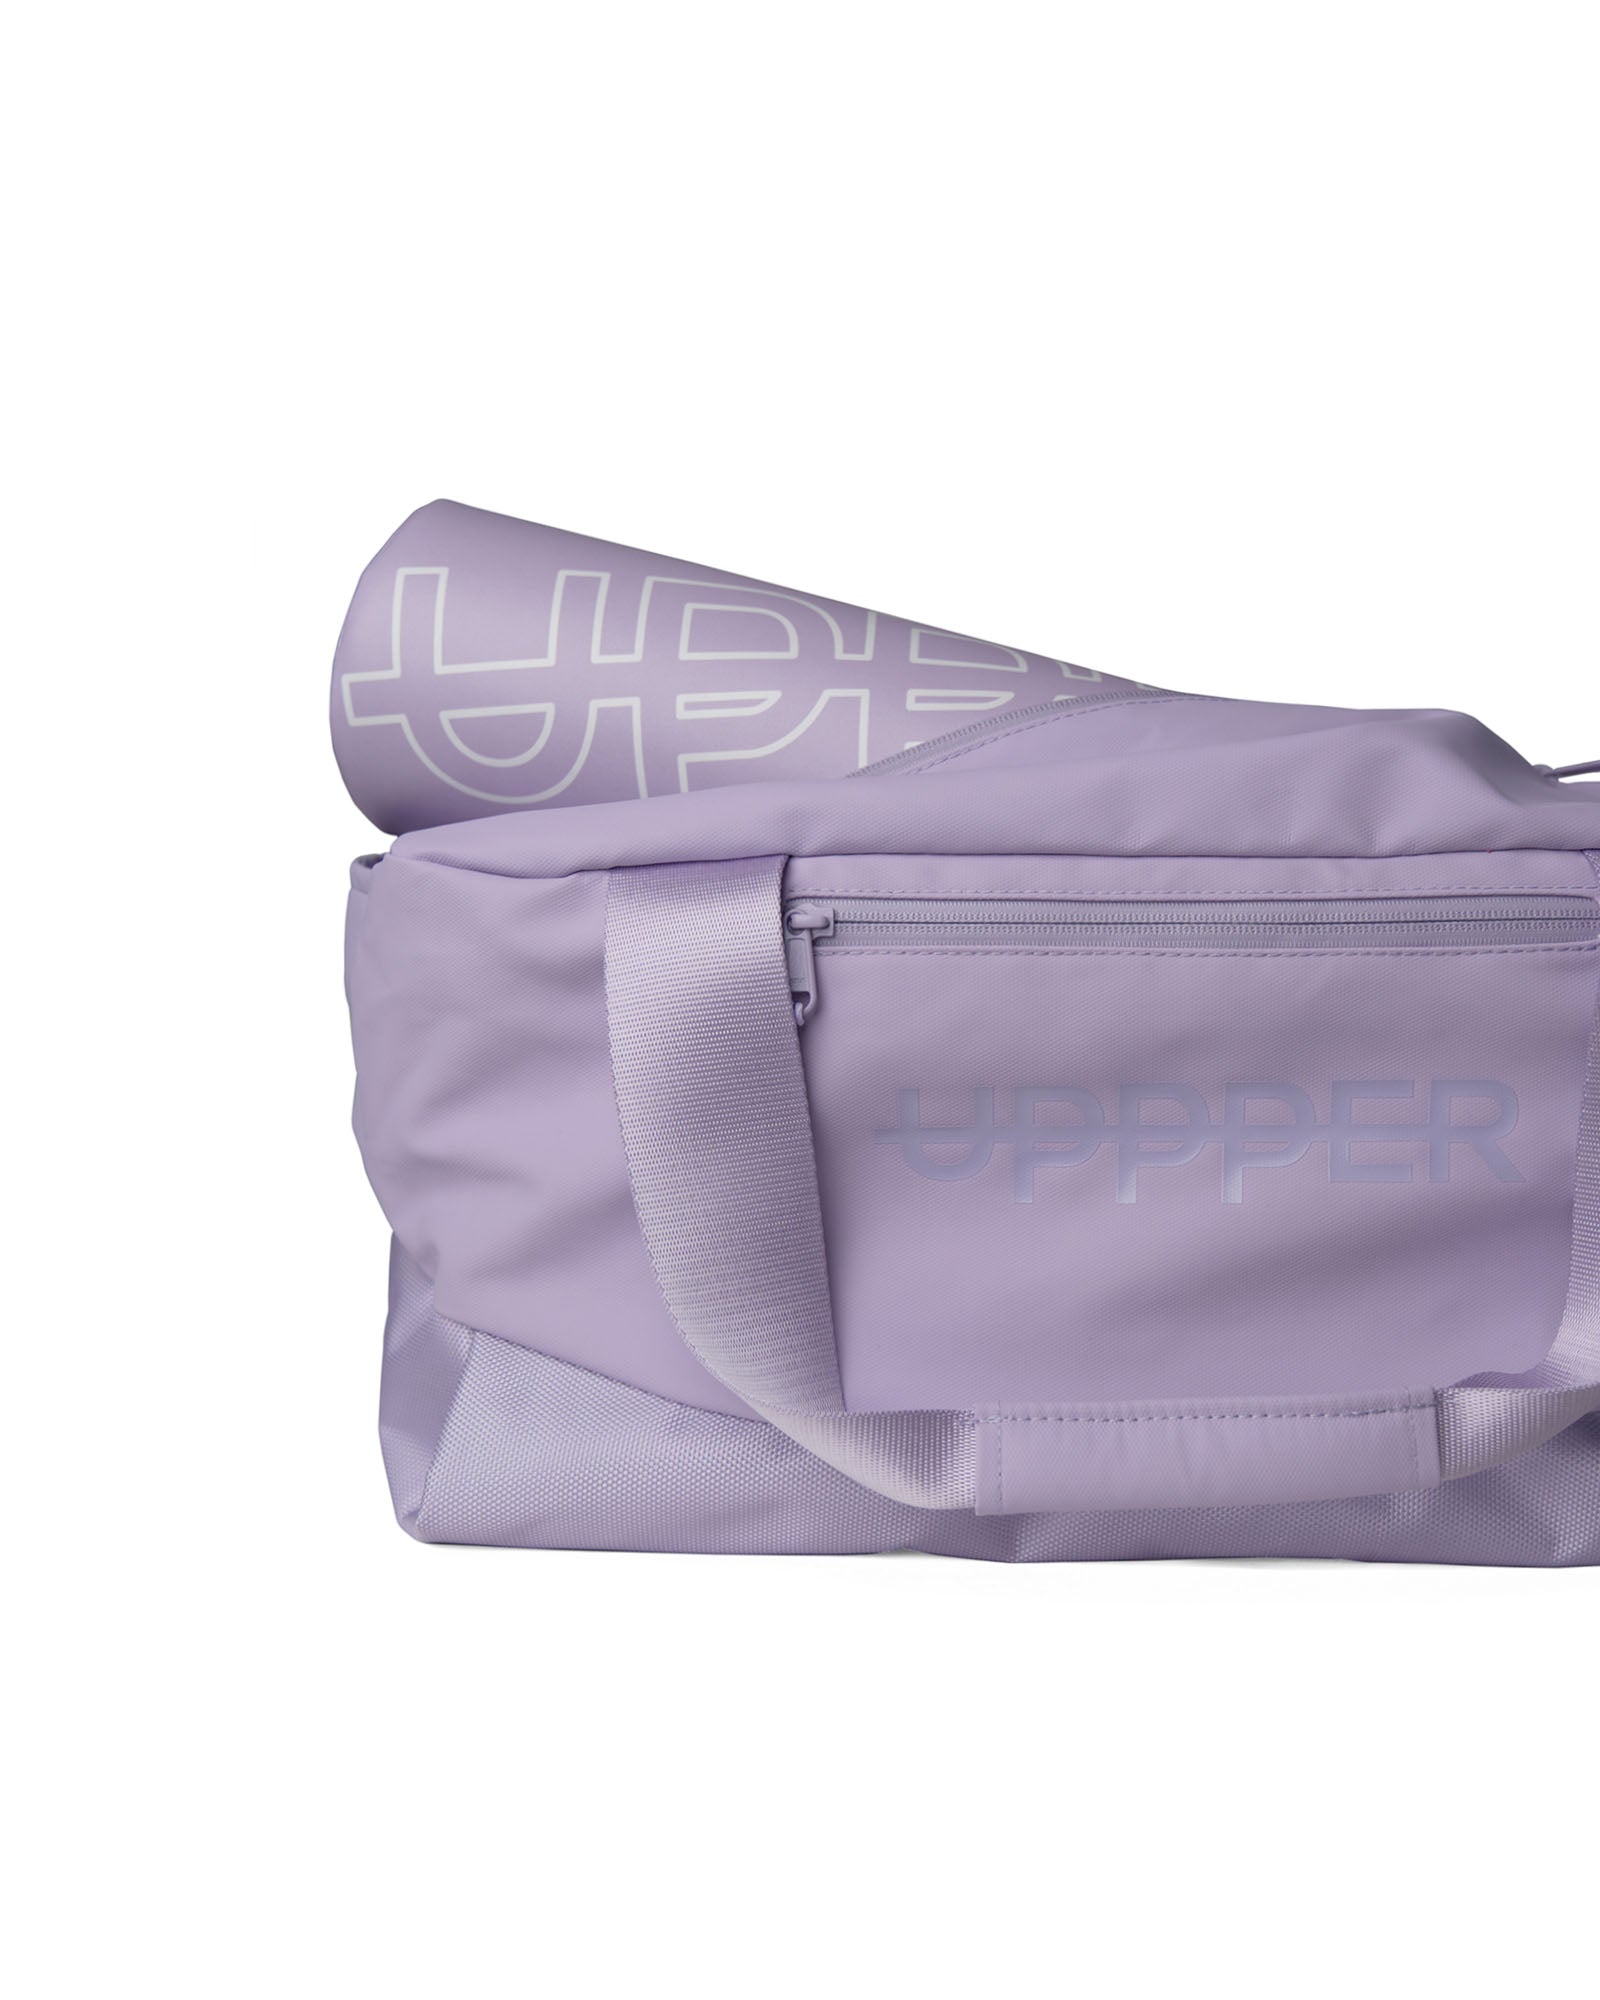 uppper gym bag lavender with barbell pad inside of it